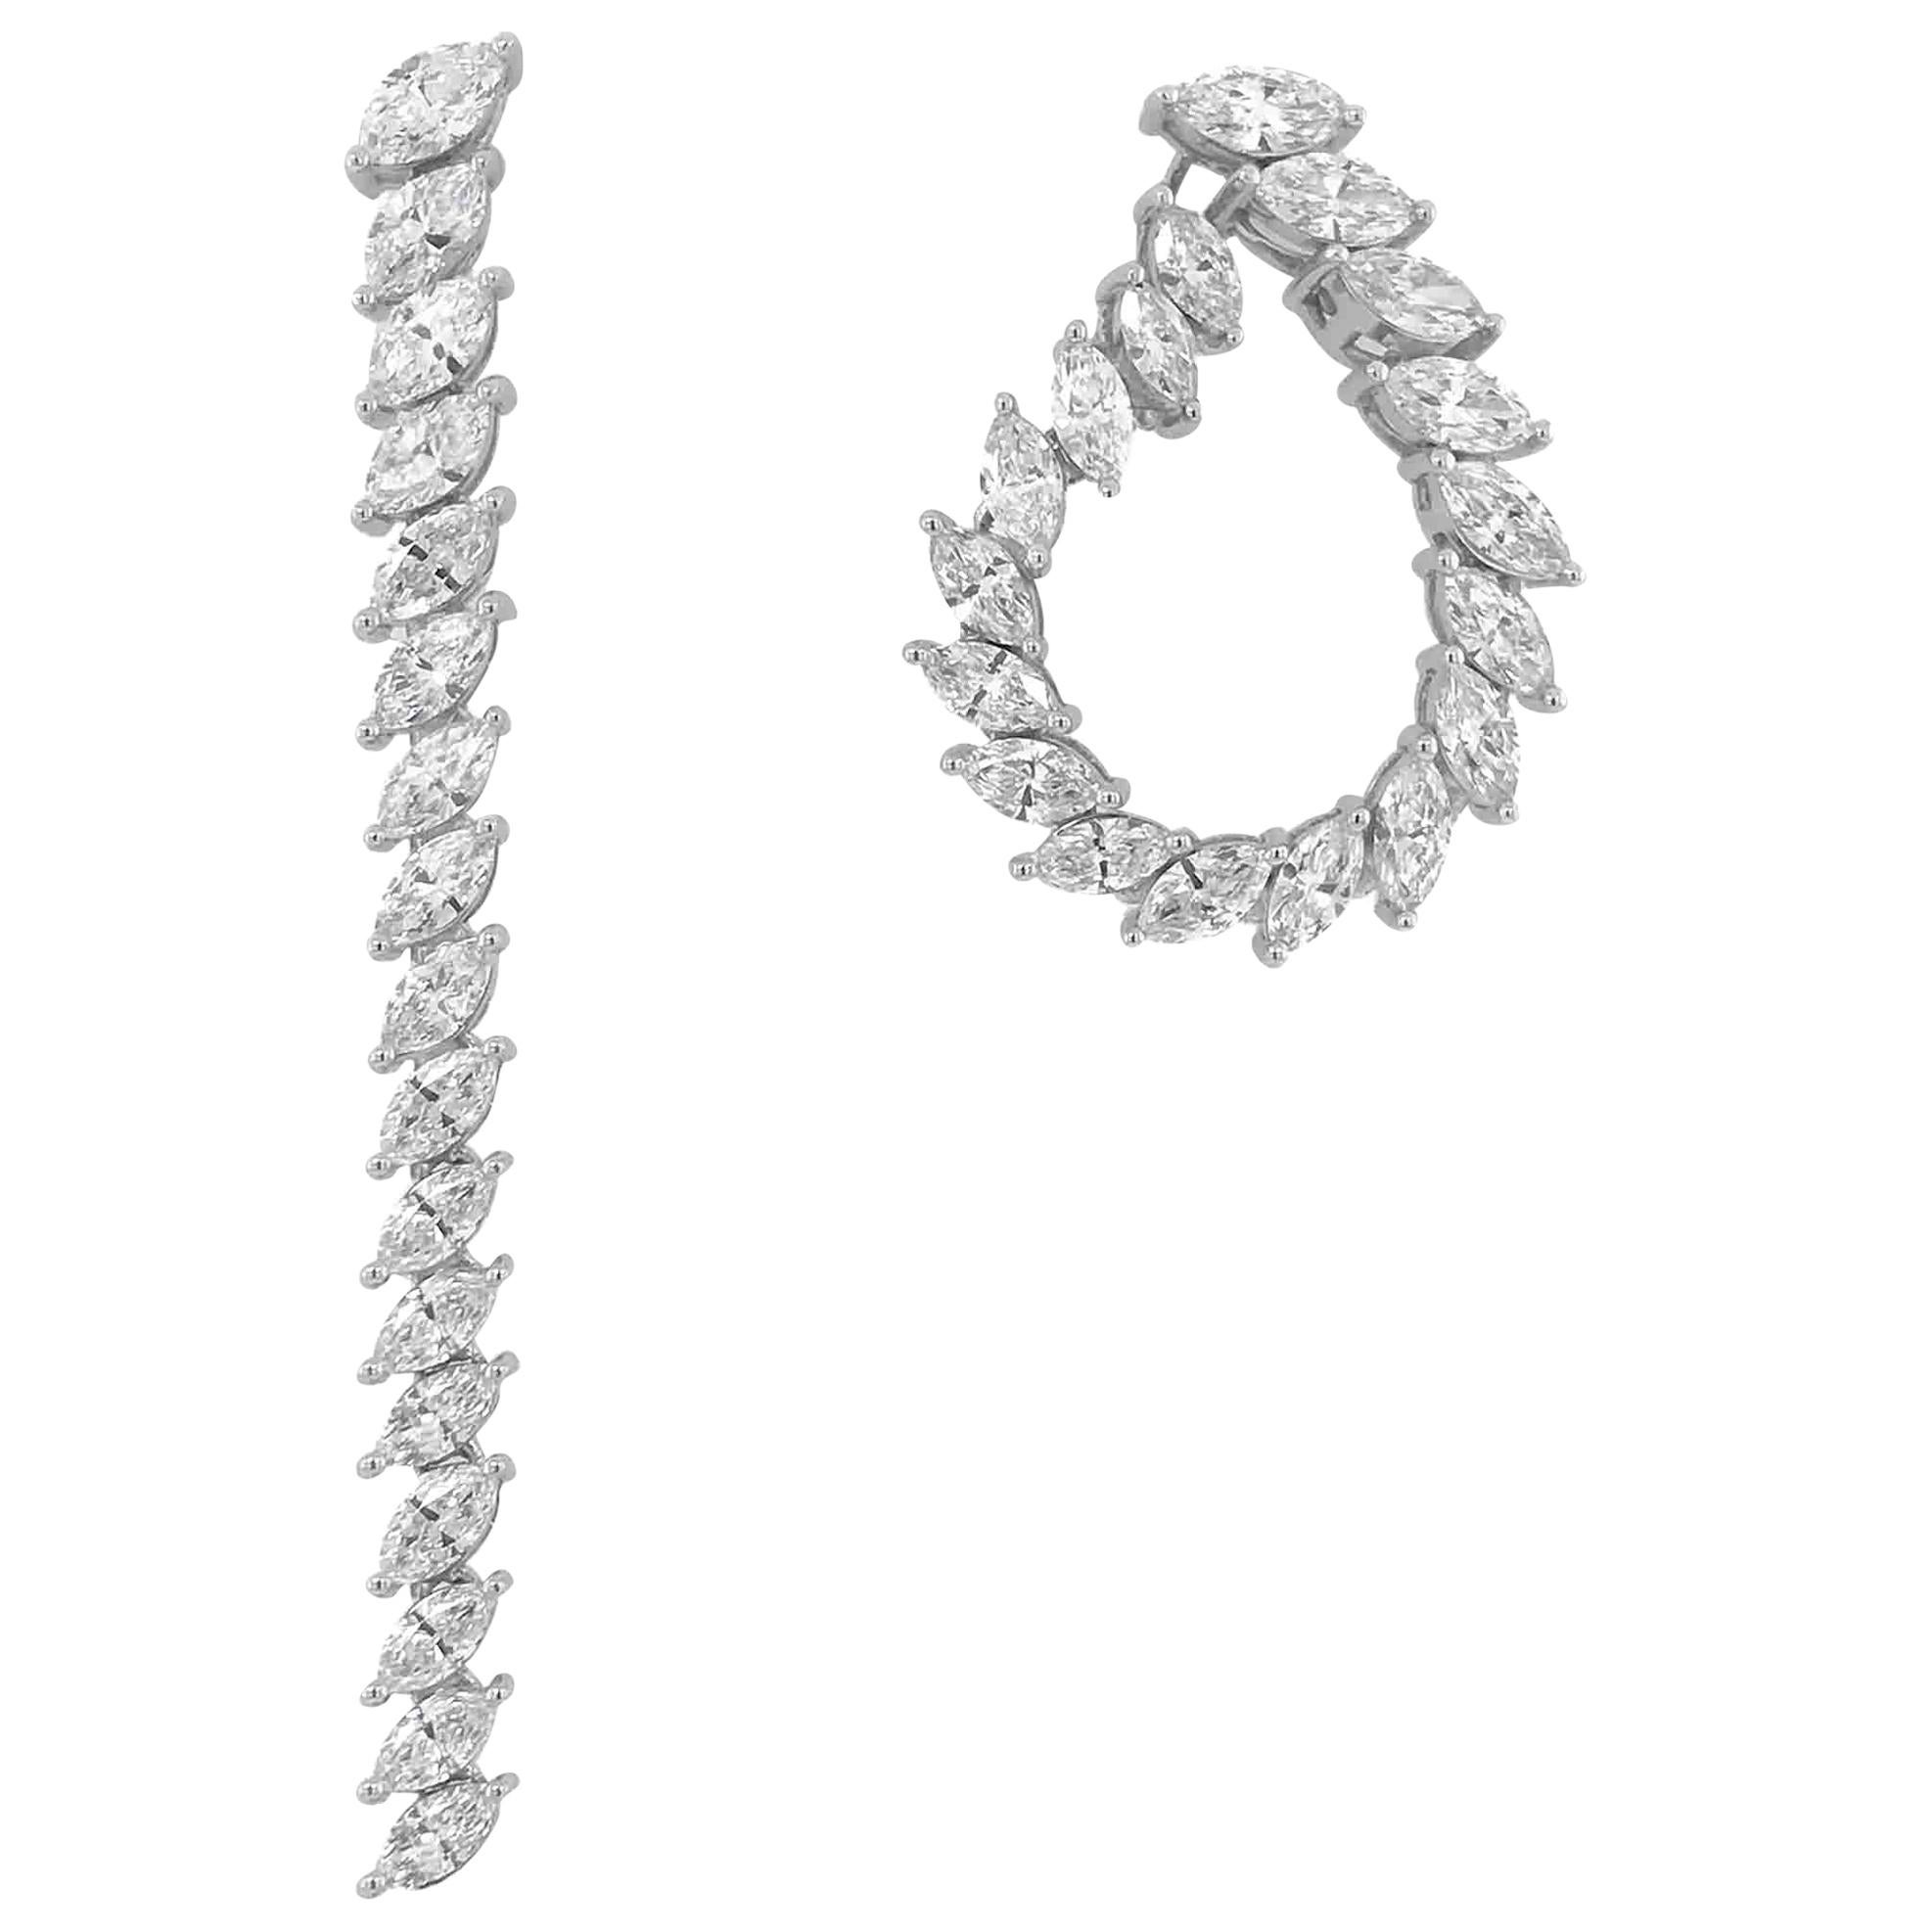 Marquise Diamond Convertible Earrings 3.88 Carat in 18 KT White Gold 